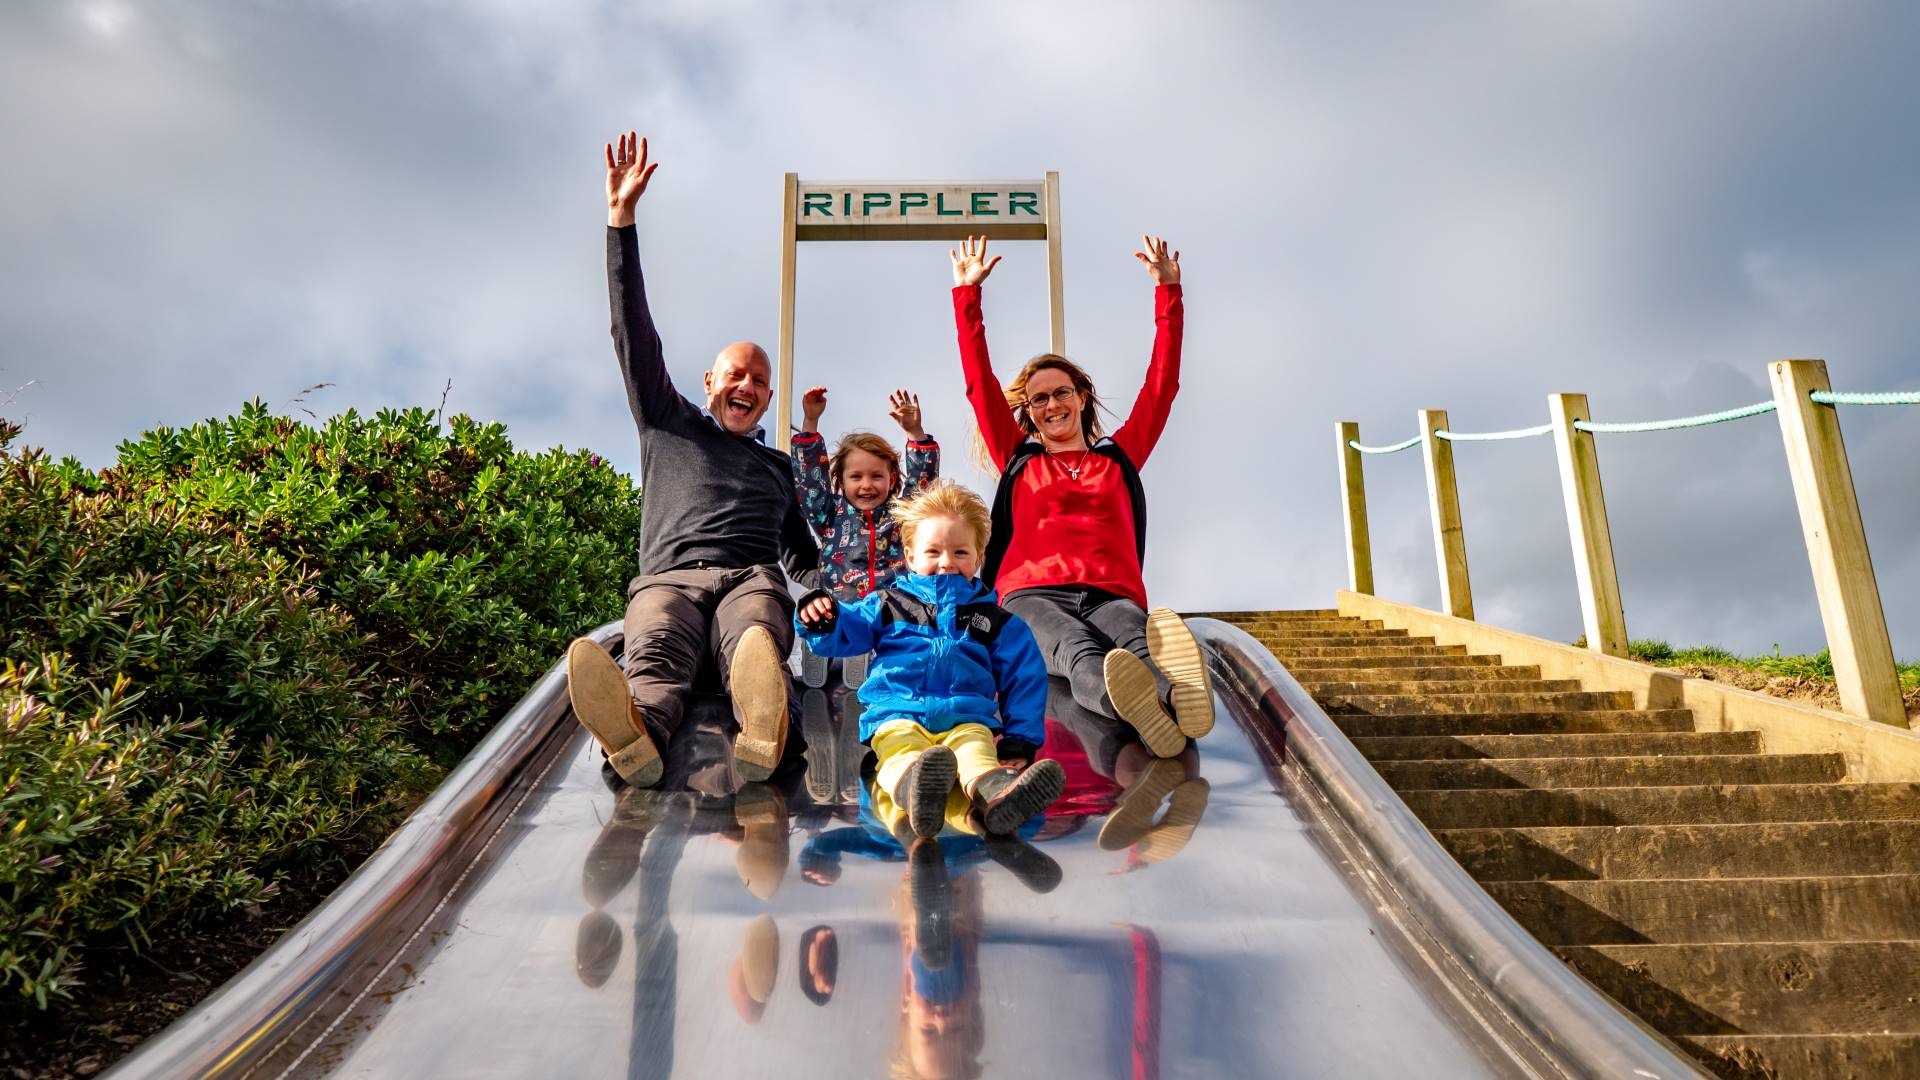 Family sliding together down a giant slide on a hill.